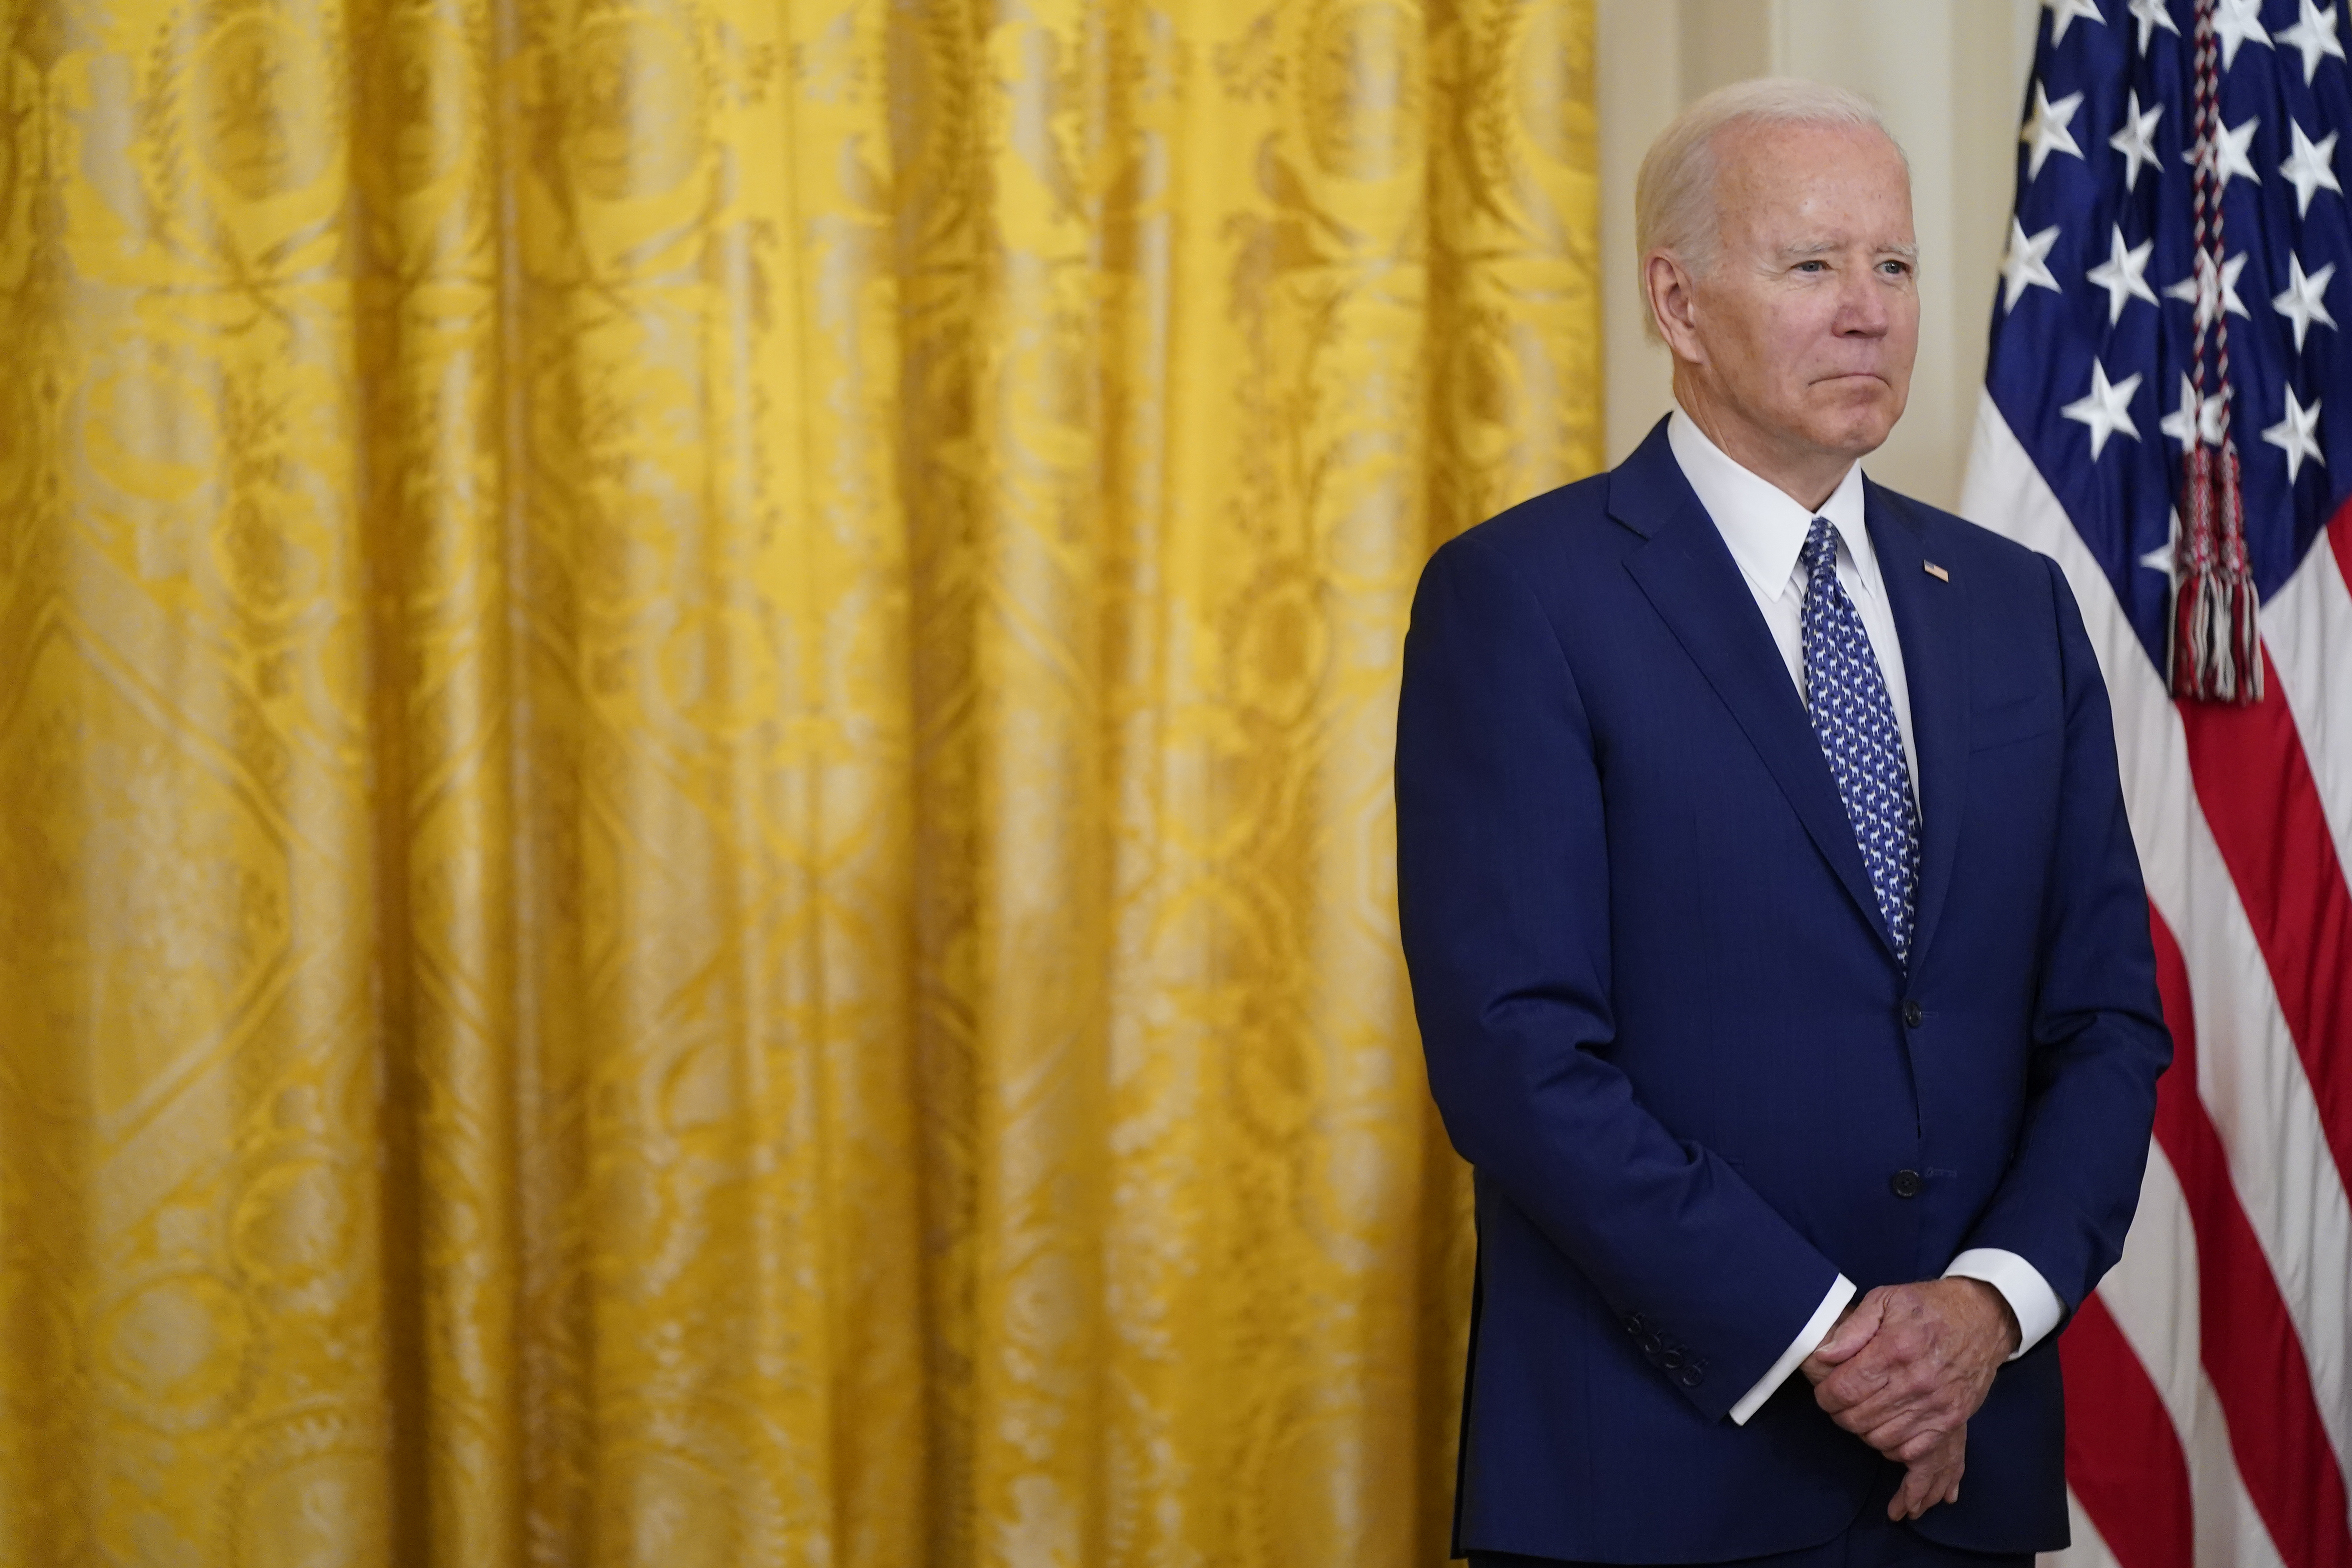 FILE - President Joe Biden waits to speak during a bill signing ceremony, June 13, 2022, in the East Room of the White House in Washington. Biden will make his first trip to the Middle East next month with visits to Israel, the West Bank and Saudi Arabia. (AP Photo/Patrick Semansky, File)